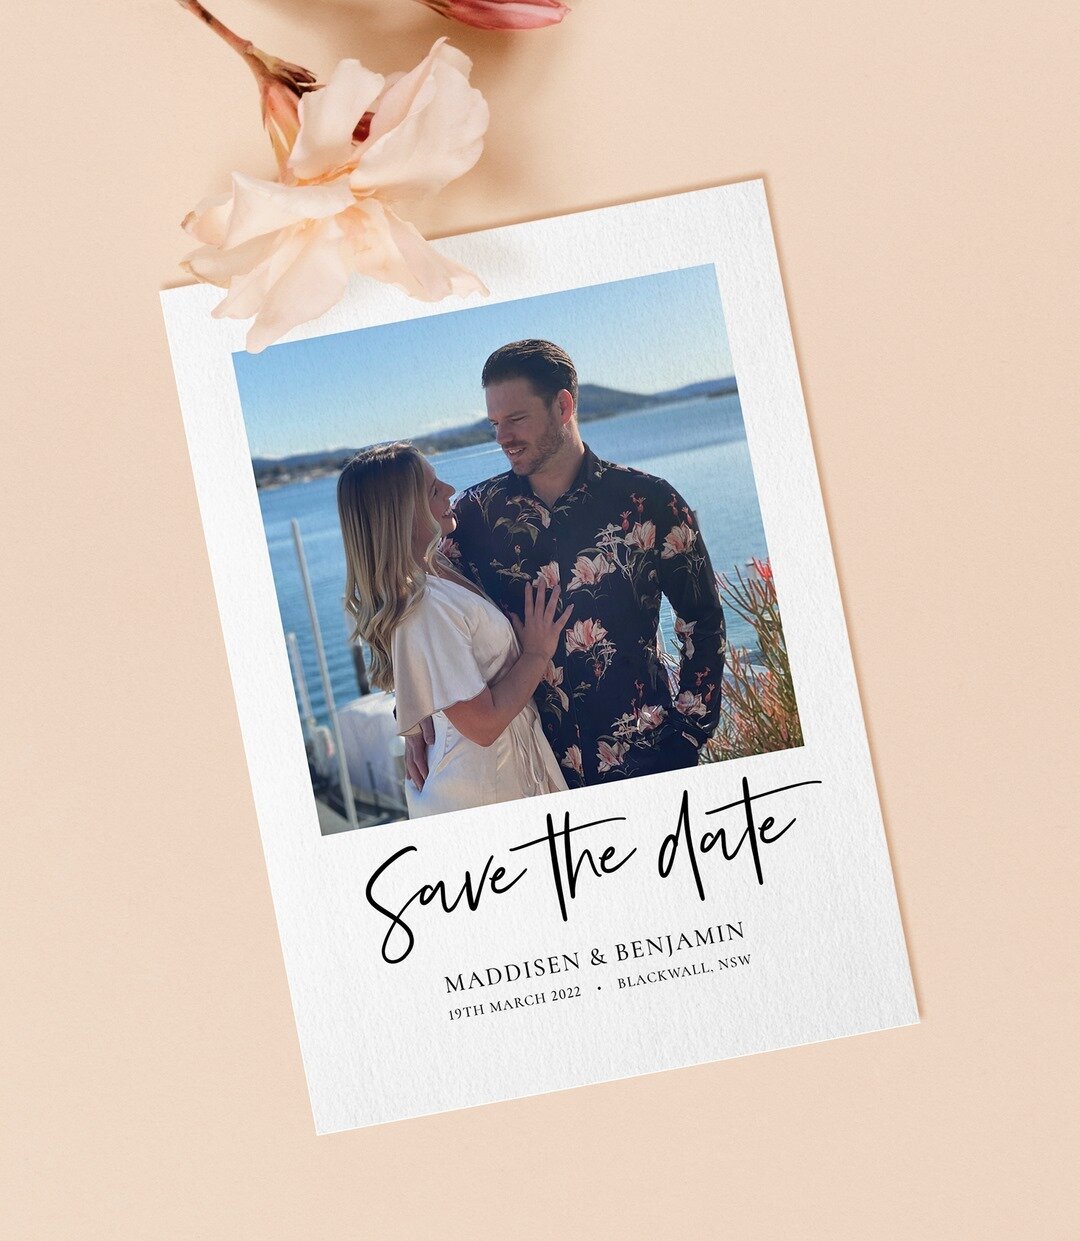 Designing my besite's save the dates for her wedding brings me so much joy! I can't wait to stand by her side and watch her marry the love of her life. 😍🥰